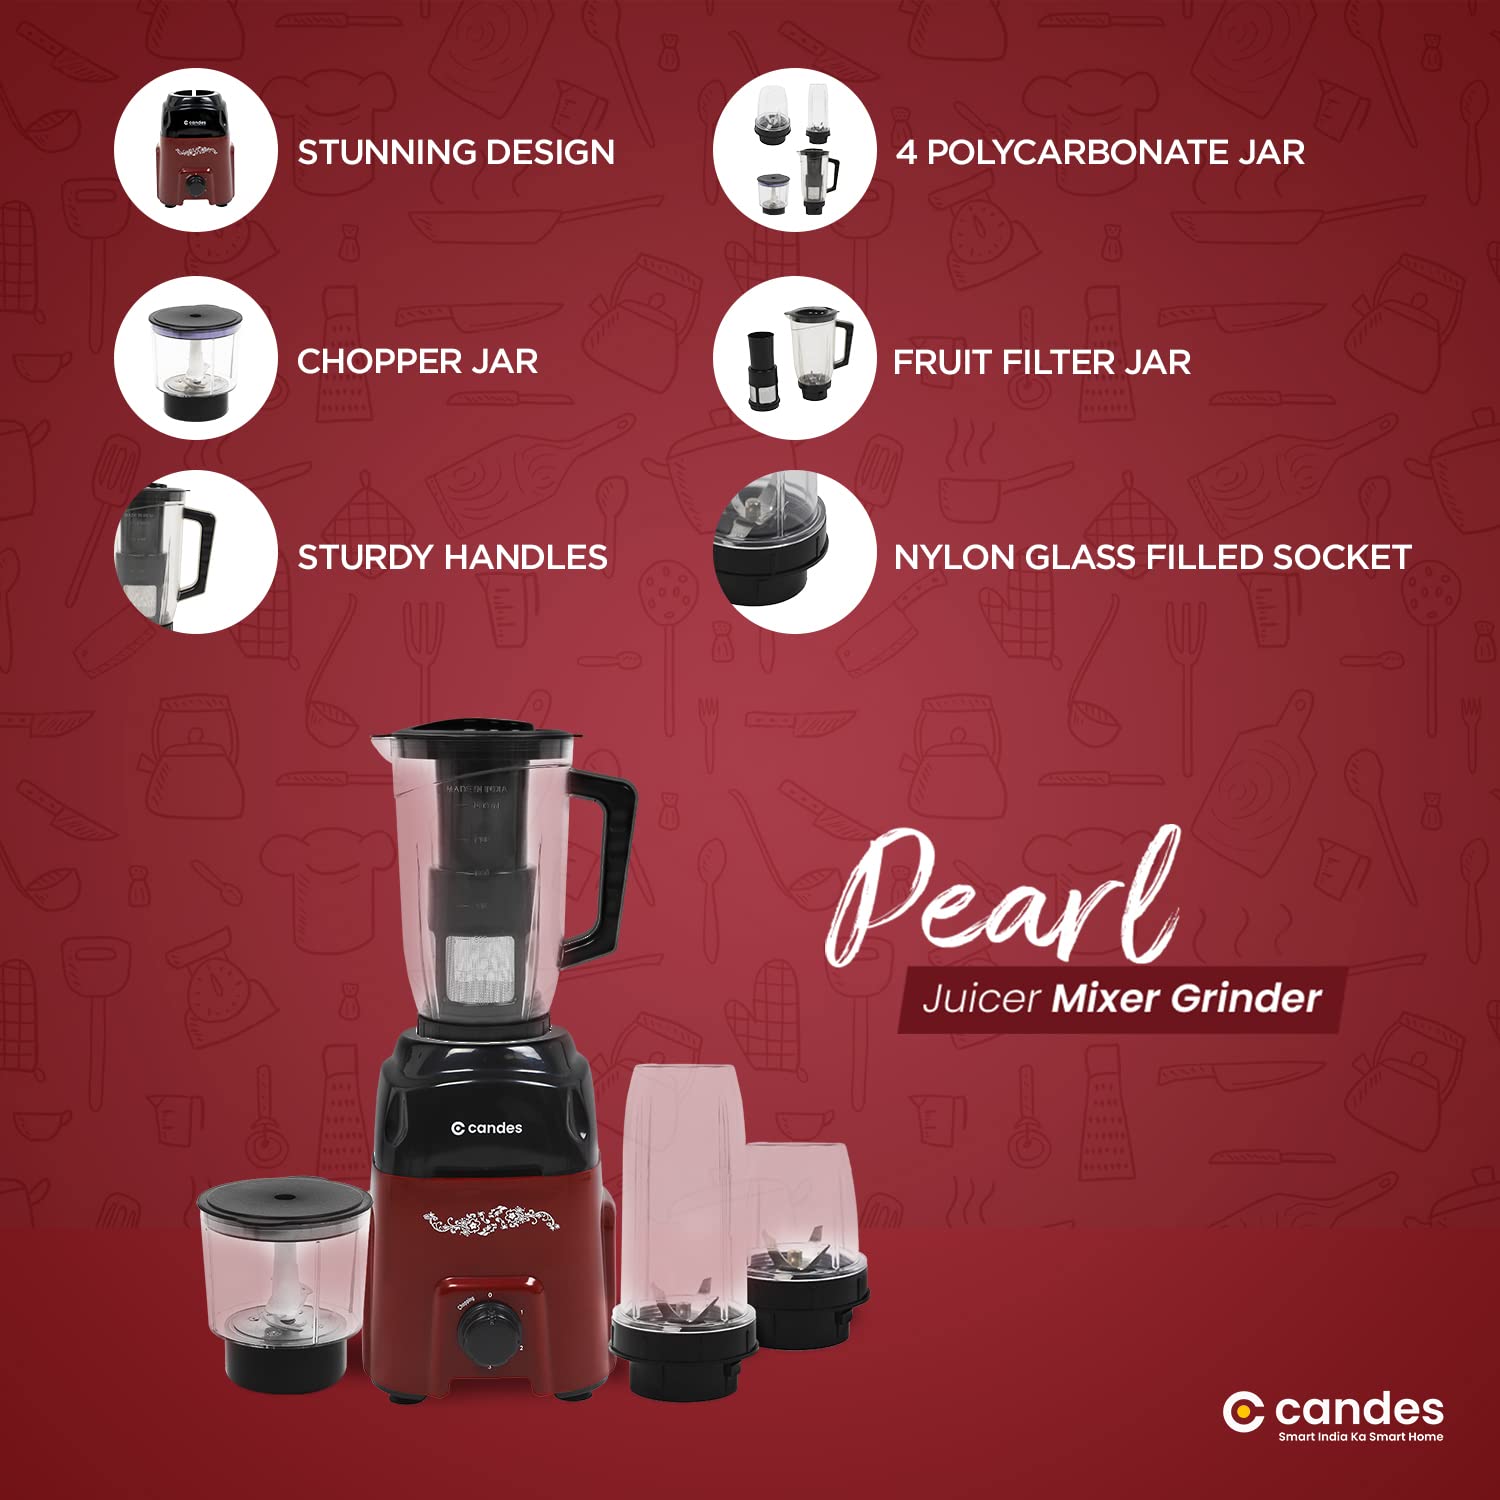 Candes Pearl 600 W Mixer Grinder 4 Jars - Black, Red (1 Year Warranty + 2 Years on Motor Only)